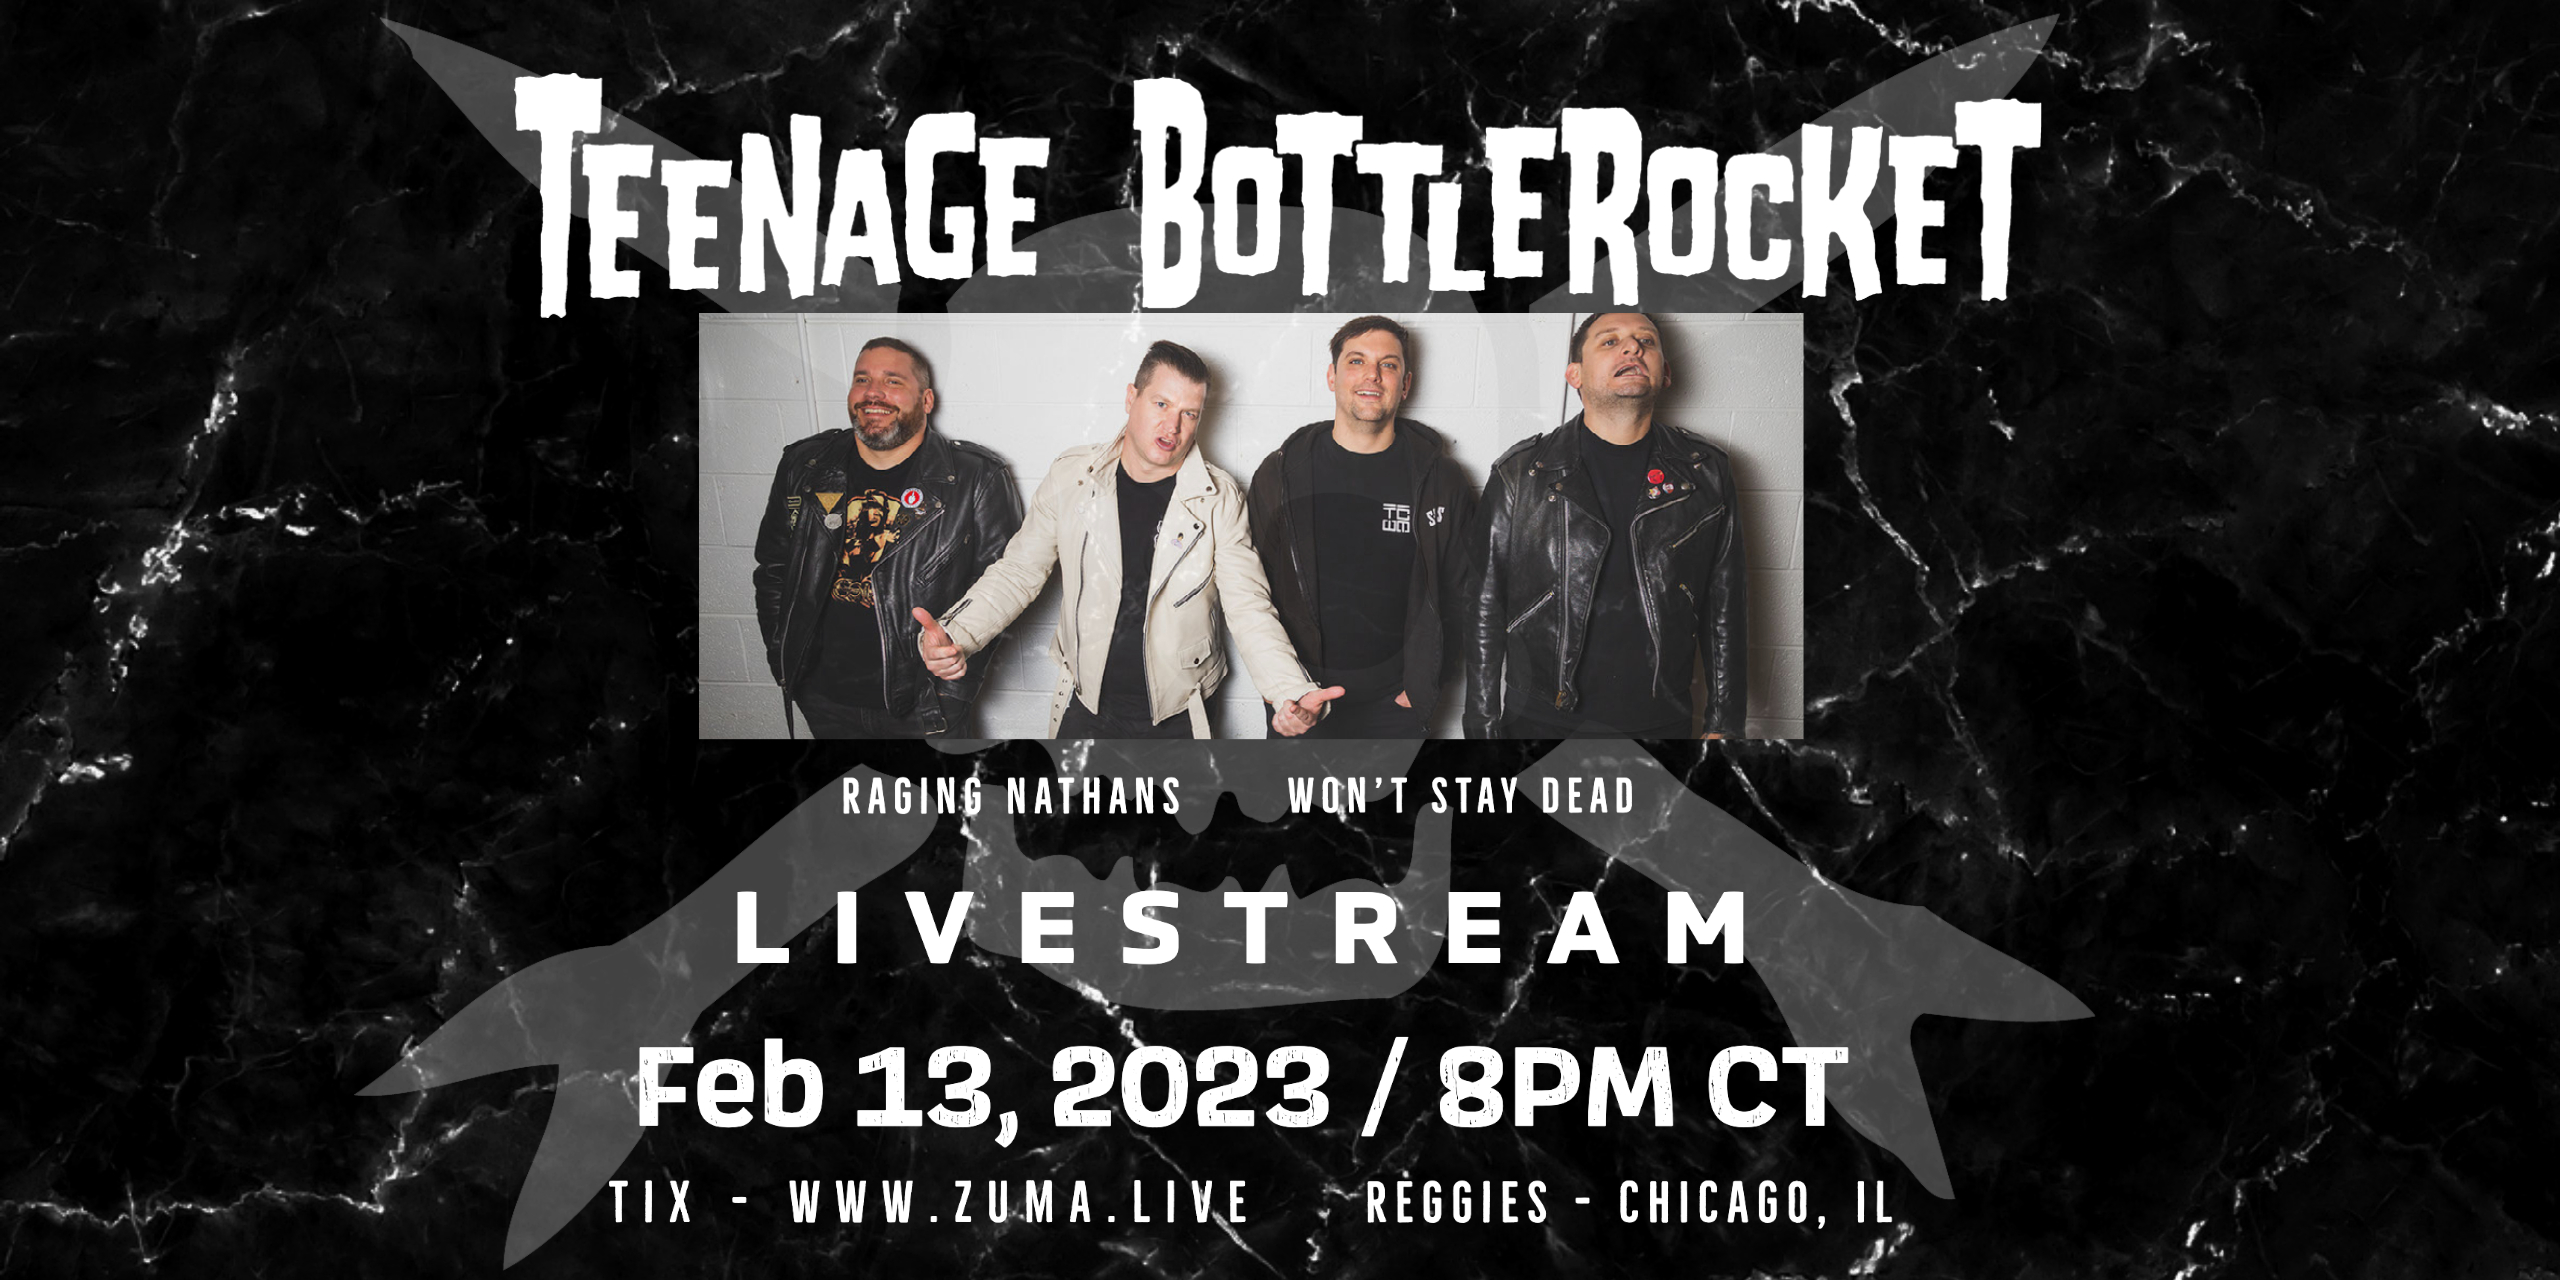 Exclusive Livestream with Teenage Bottlerocket plus Raging Nathans and Won't Stay Dead. Watch Live Feb 13 then On-Demand for 24 hours.